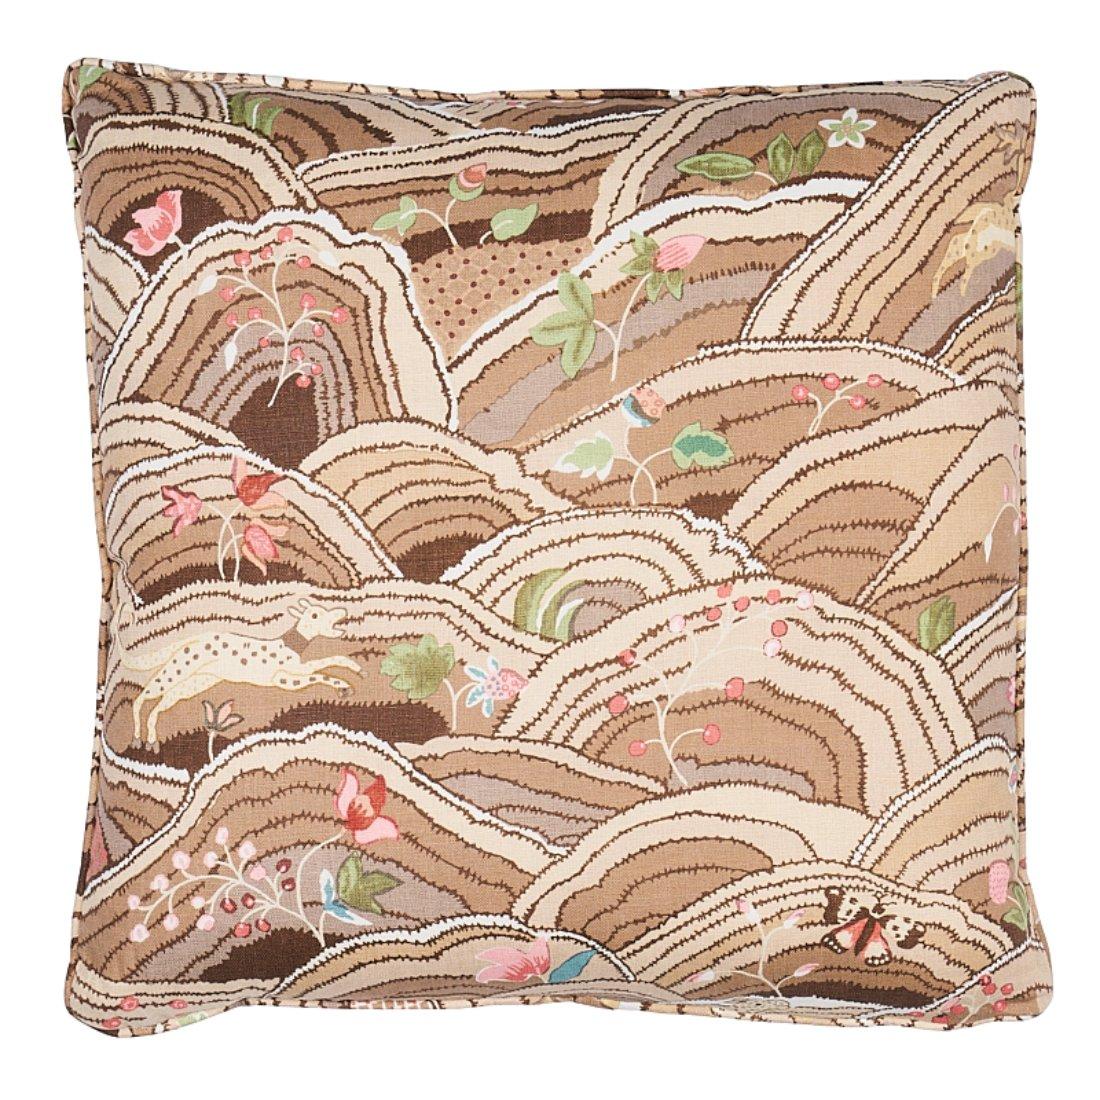 This pillow features Rolling Hills with a self welt finish. Charming animals gambol within a naïve landscape in this whimsical full-coverage print. This design preserves the rustic simplicity of the embroidered original, which dates to 1960. Pillow